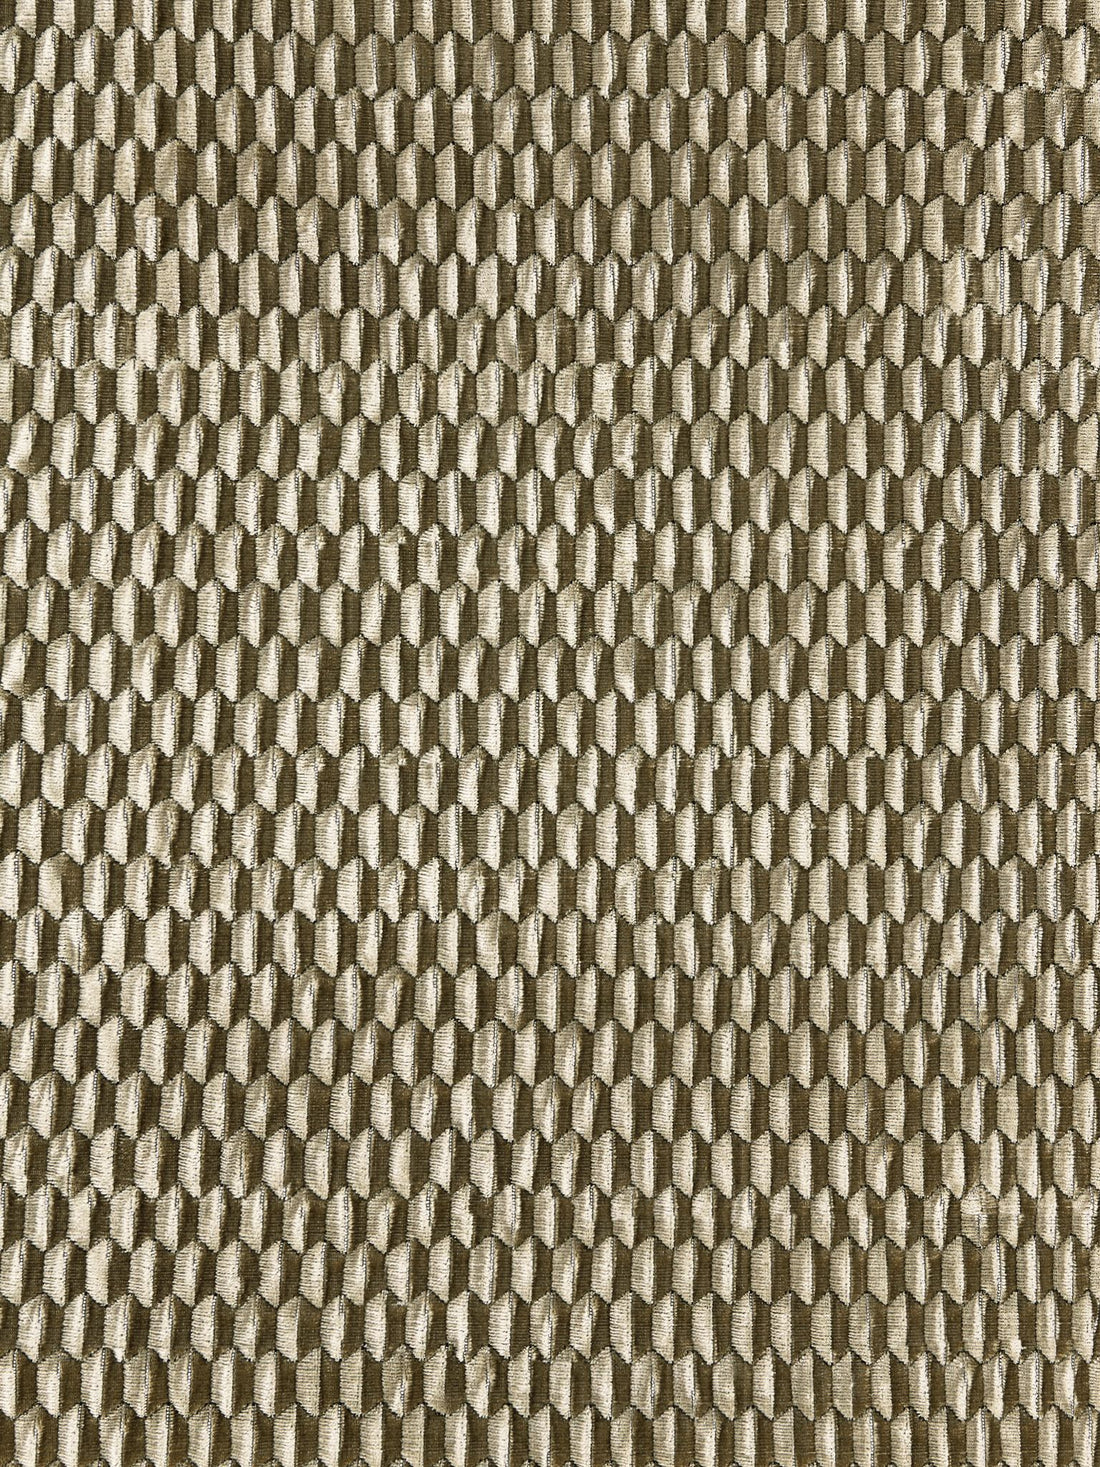 Allegra Velvet fabric in fawn color - pattern number SC 000127184 - by Scalamandre in the Scalamandre Fabrics Book 1 collection